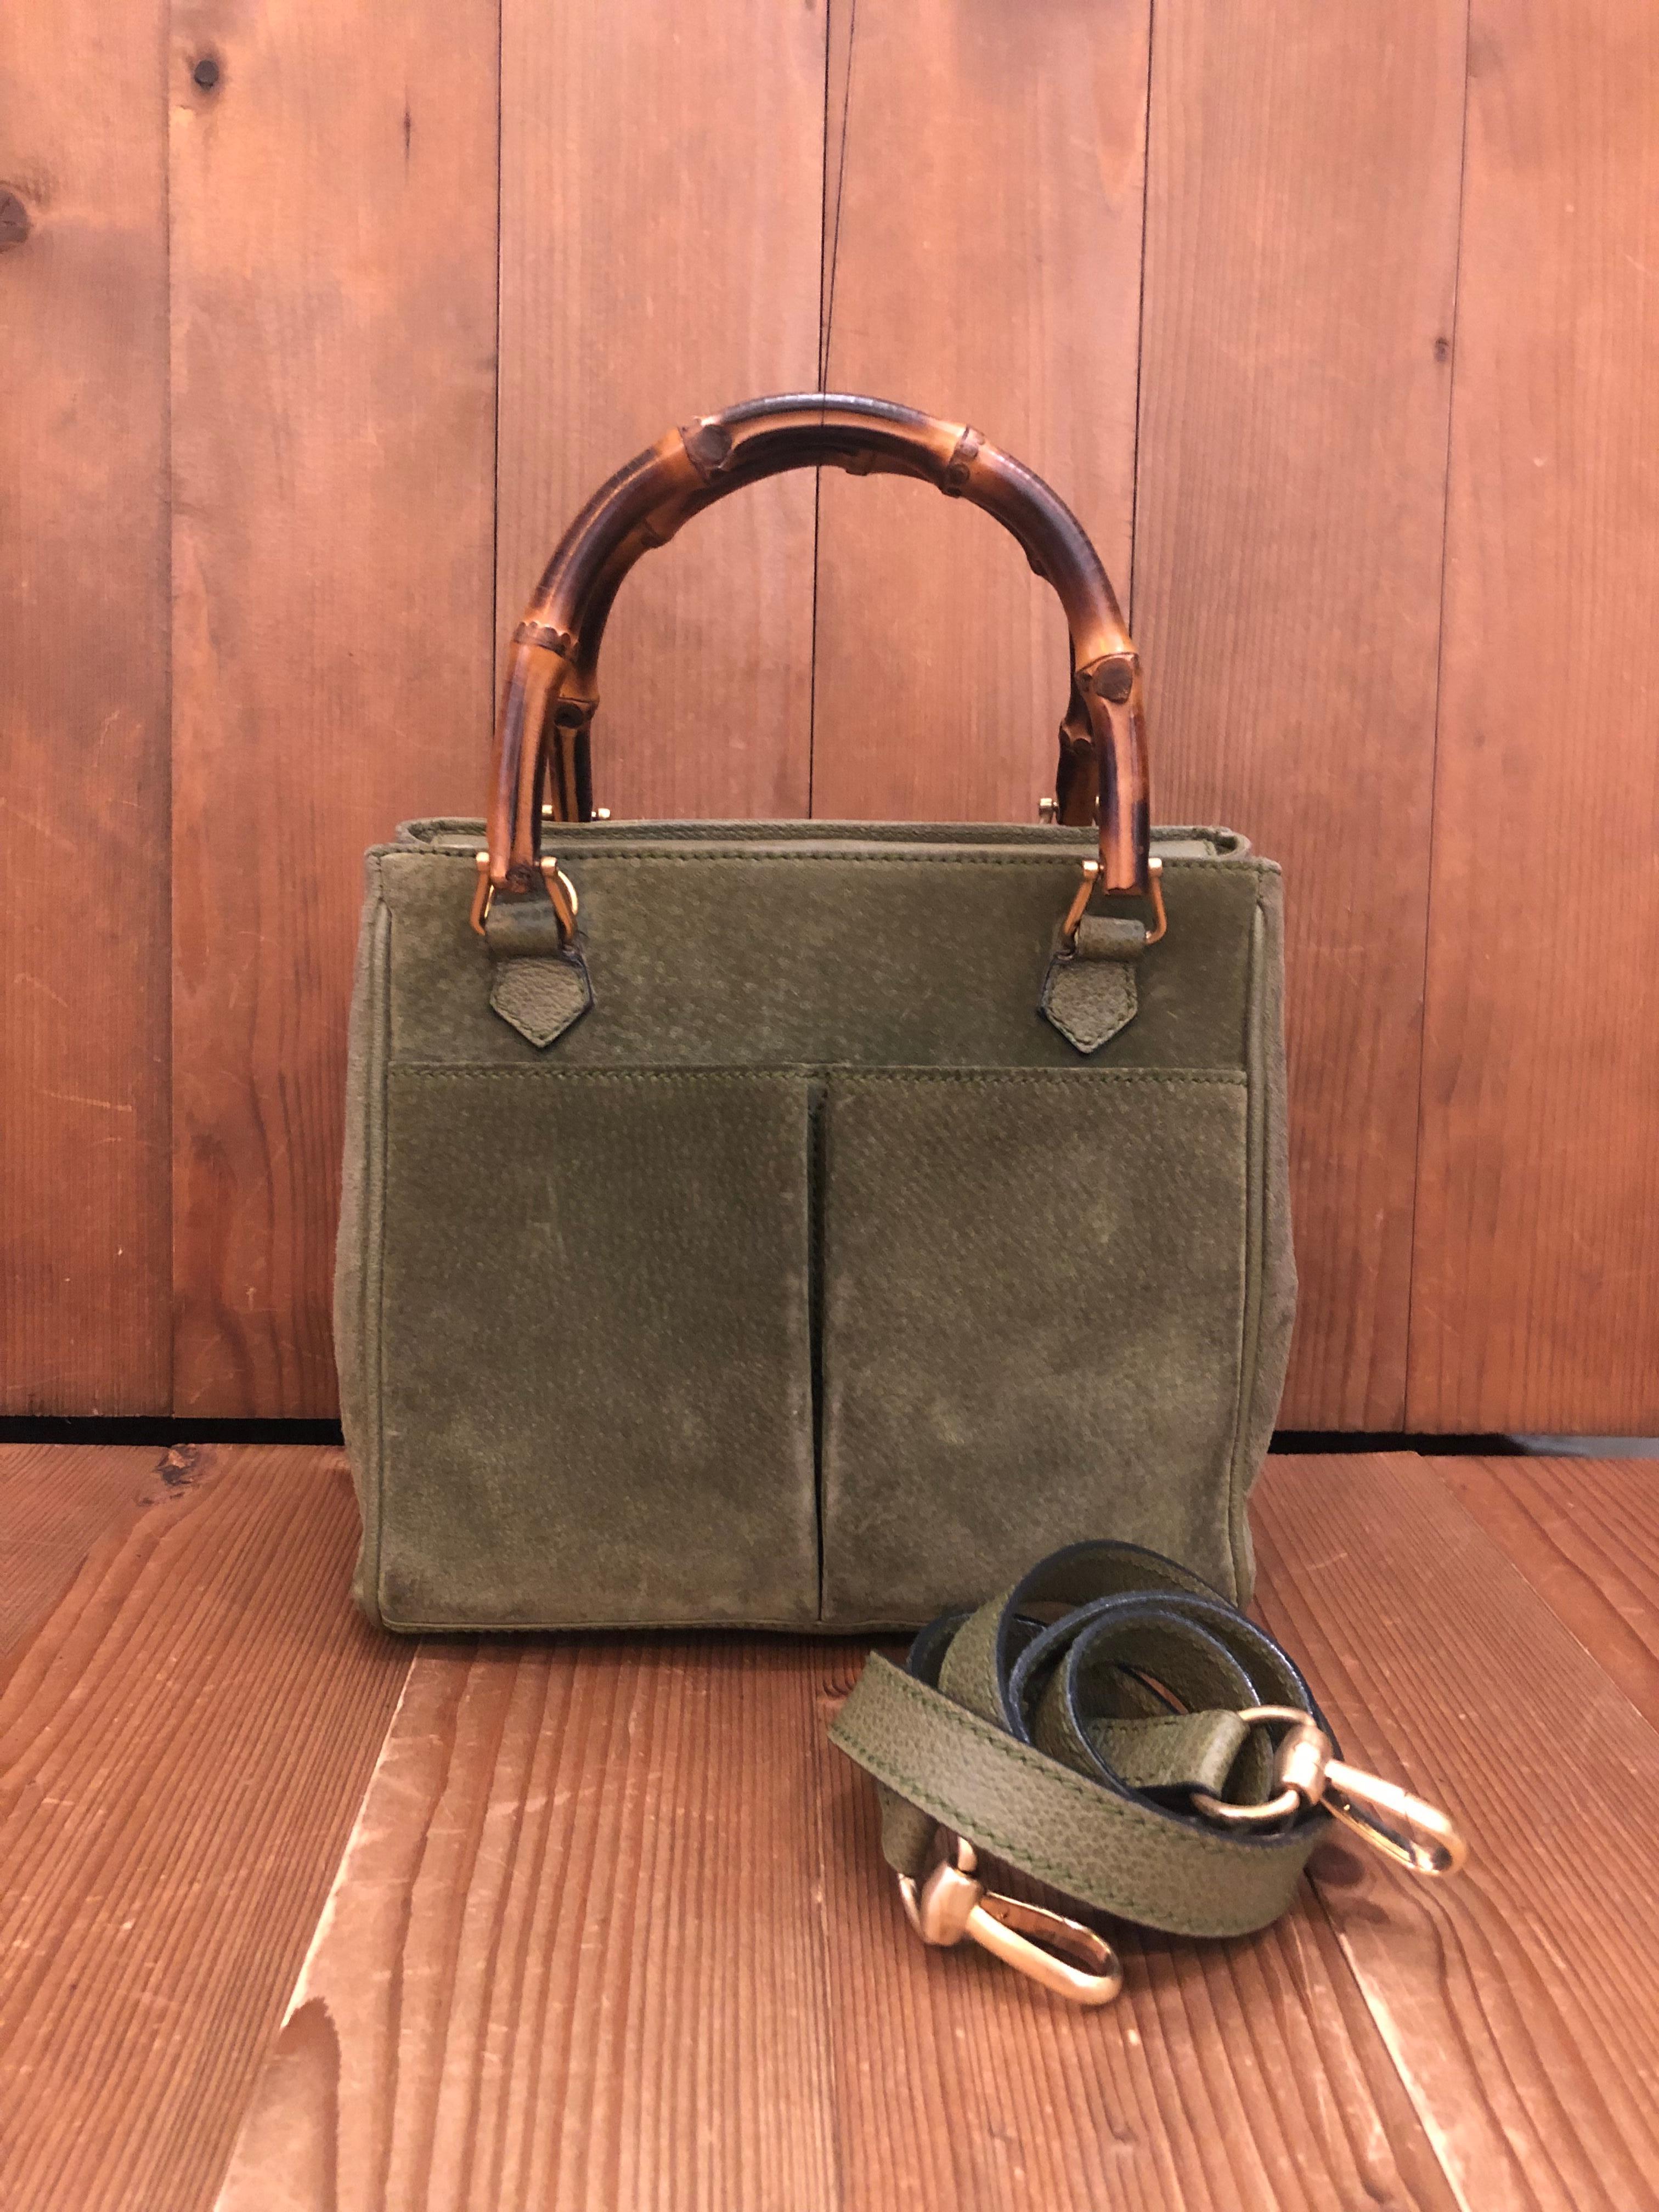 This vintage GUCCI 2-way shoulder bag is crafted of suede and pigskins leather in olive green and matt gold toned hardware. The front of this bag features two open pockets. Top magnetic snap closure open to diamanté jacquard interior with a zippered